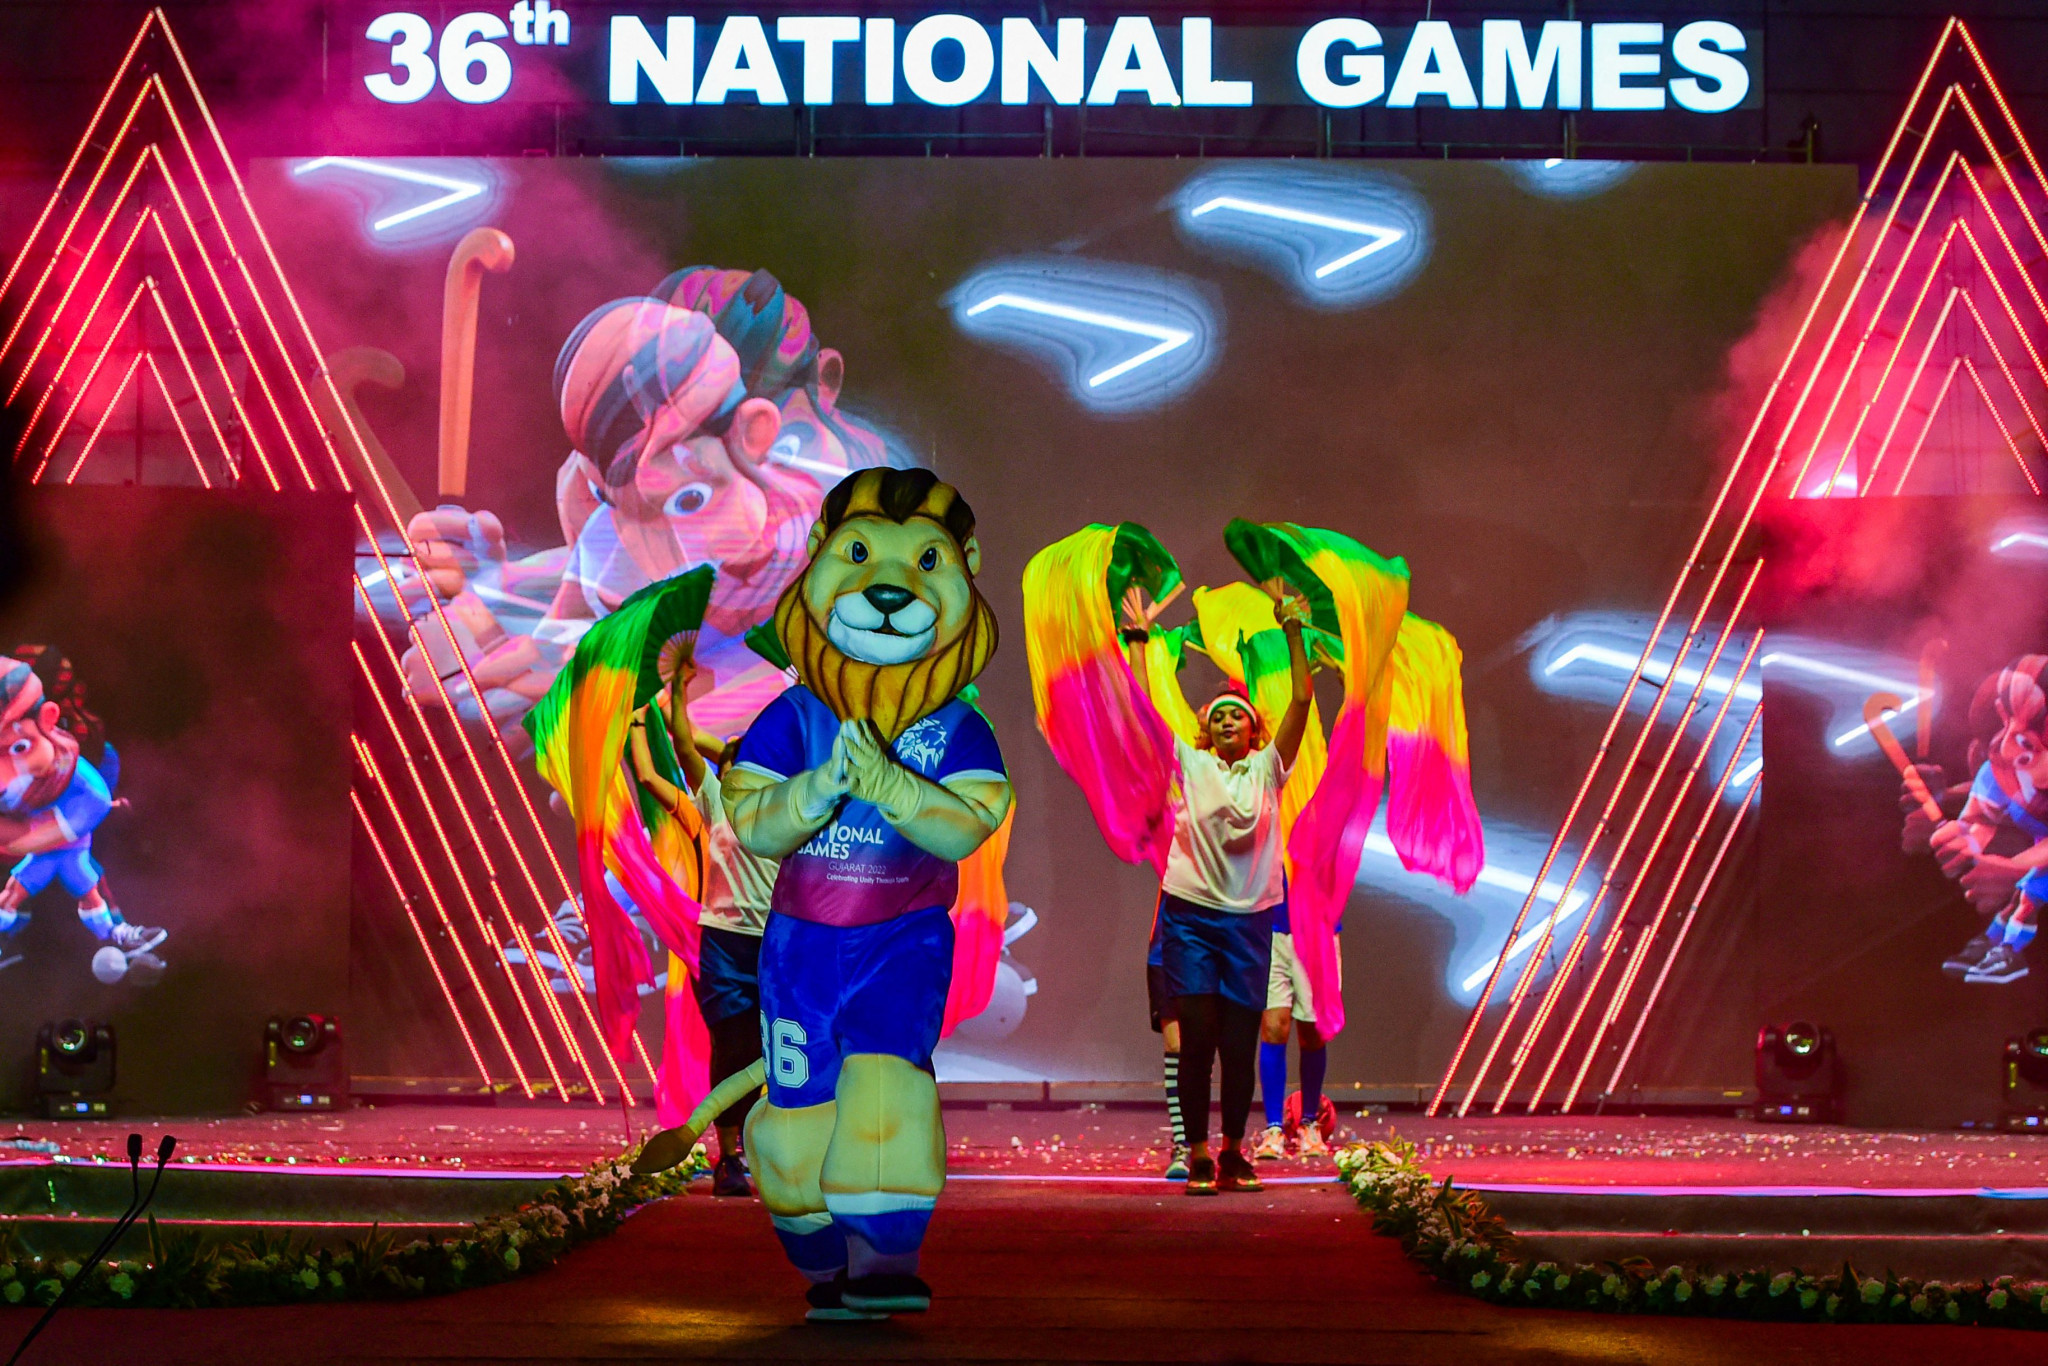 Indian Olympic Association names Goa as host of 37th National Games